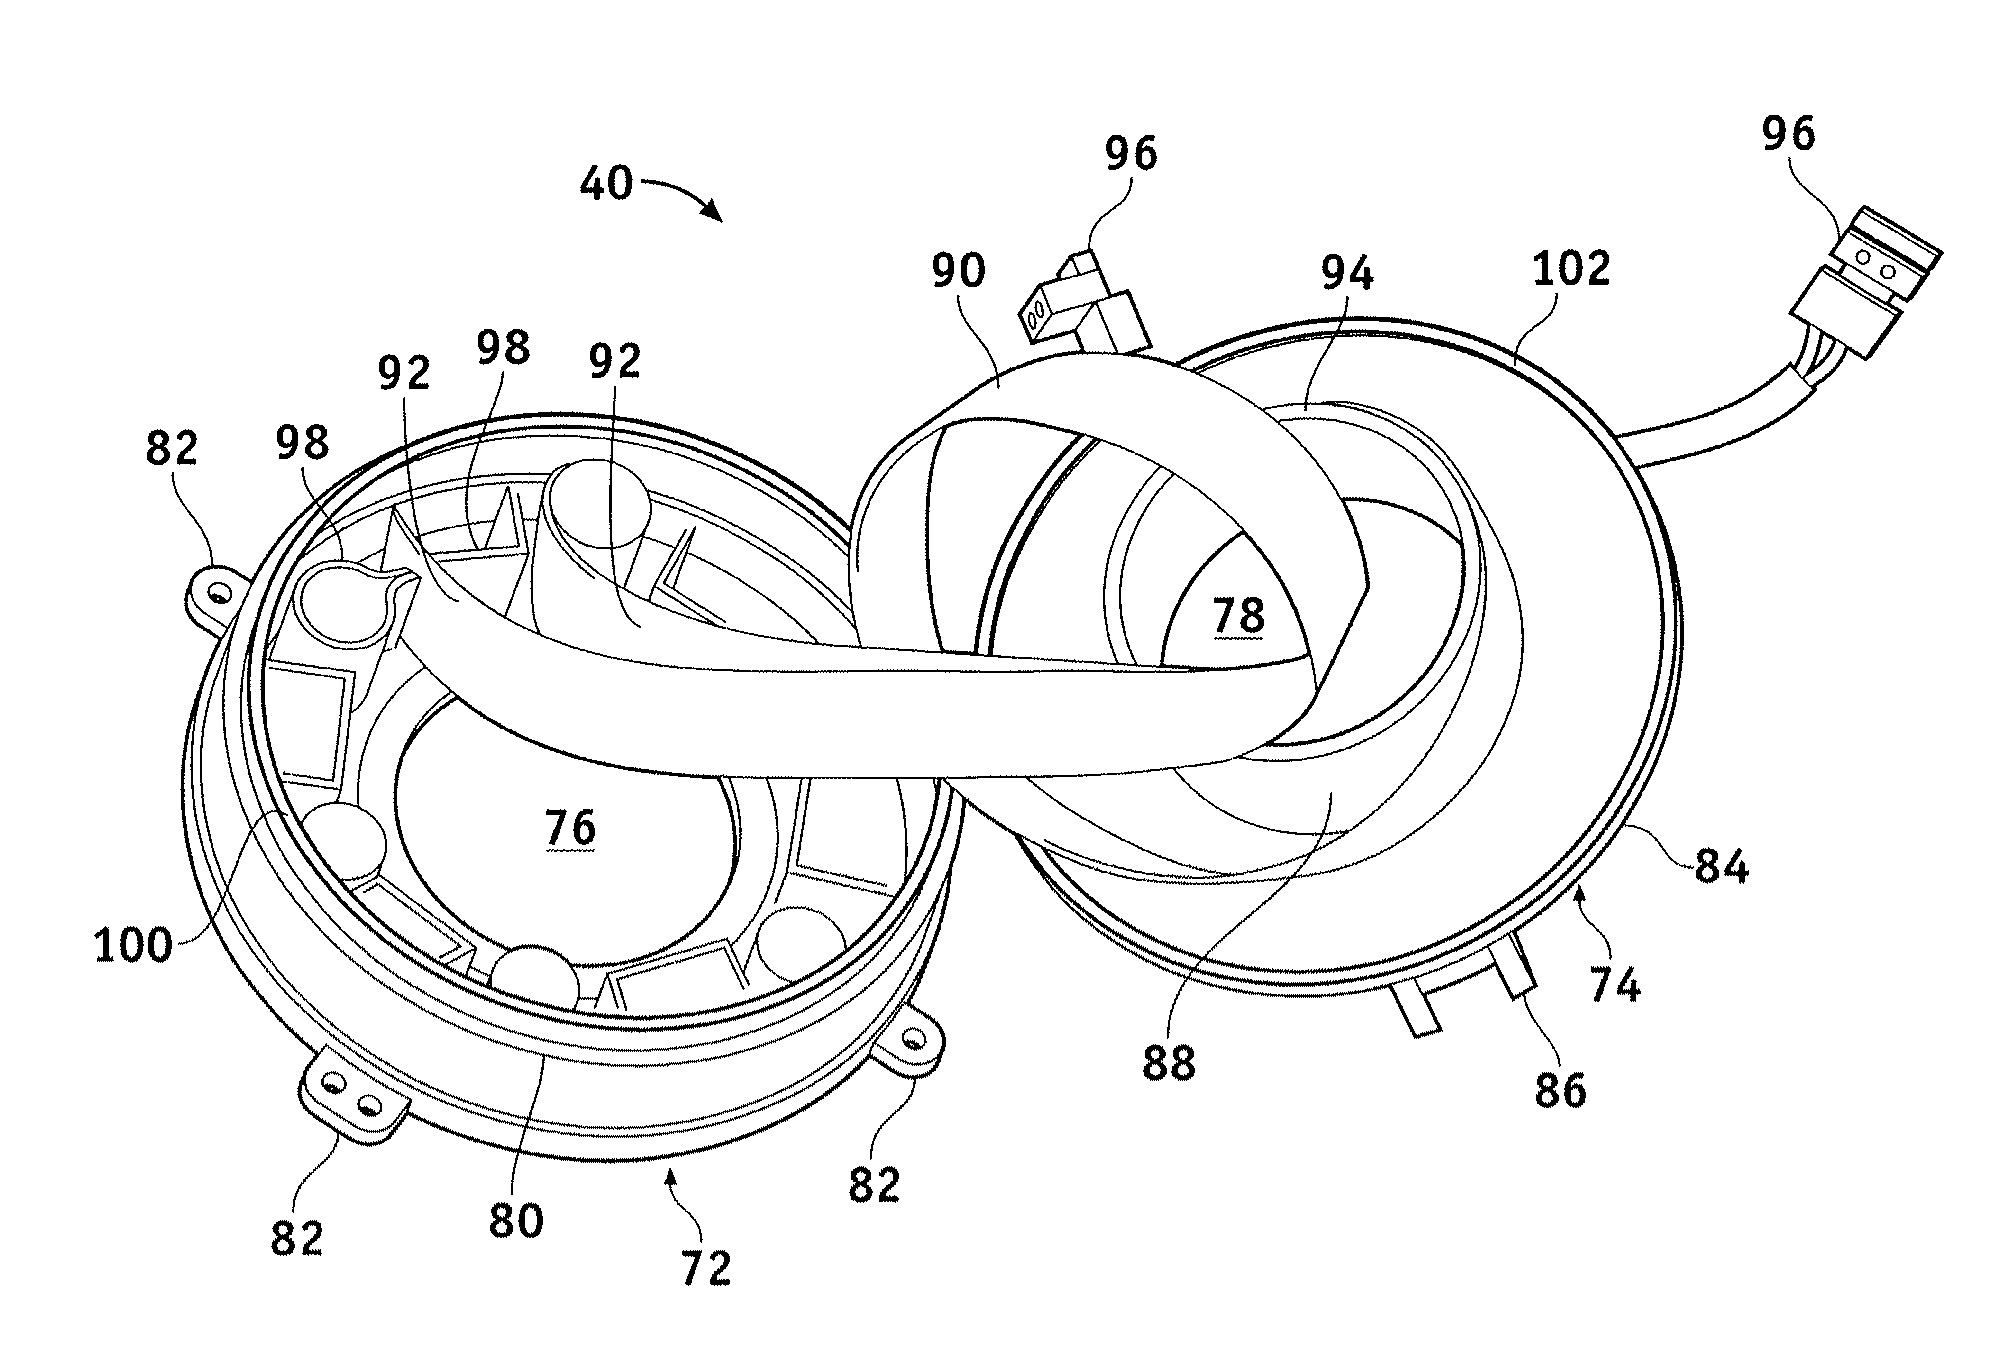 Vehicular steering wheel and column assembly including torsional damper device